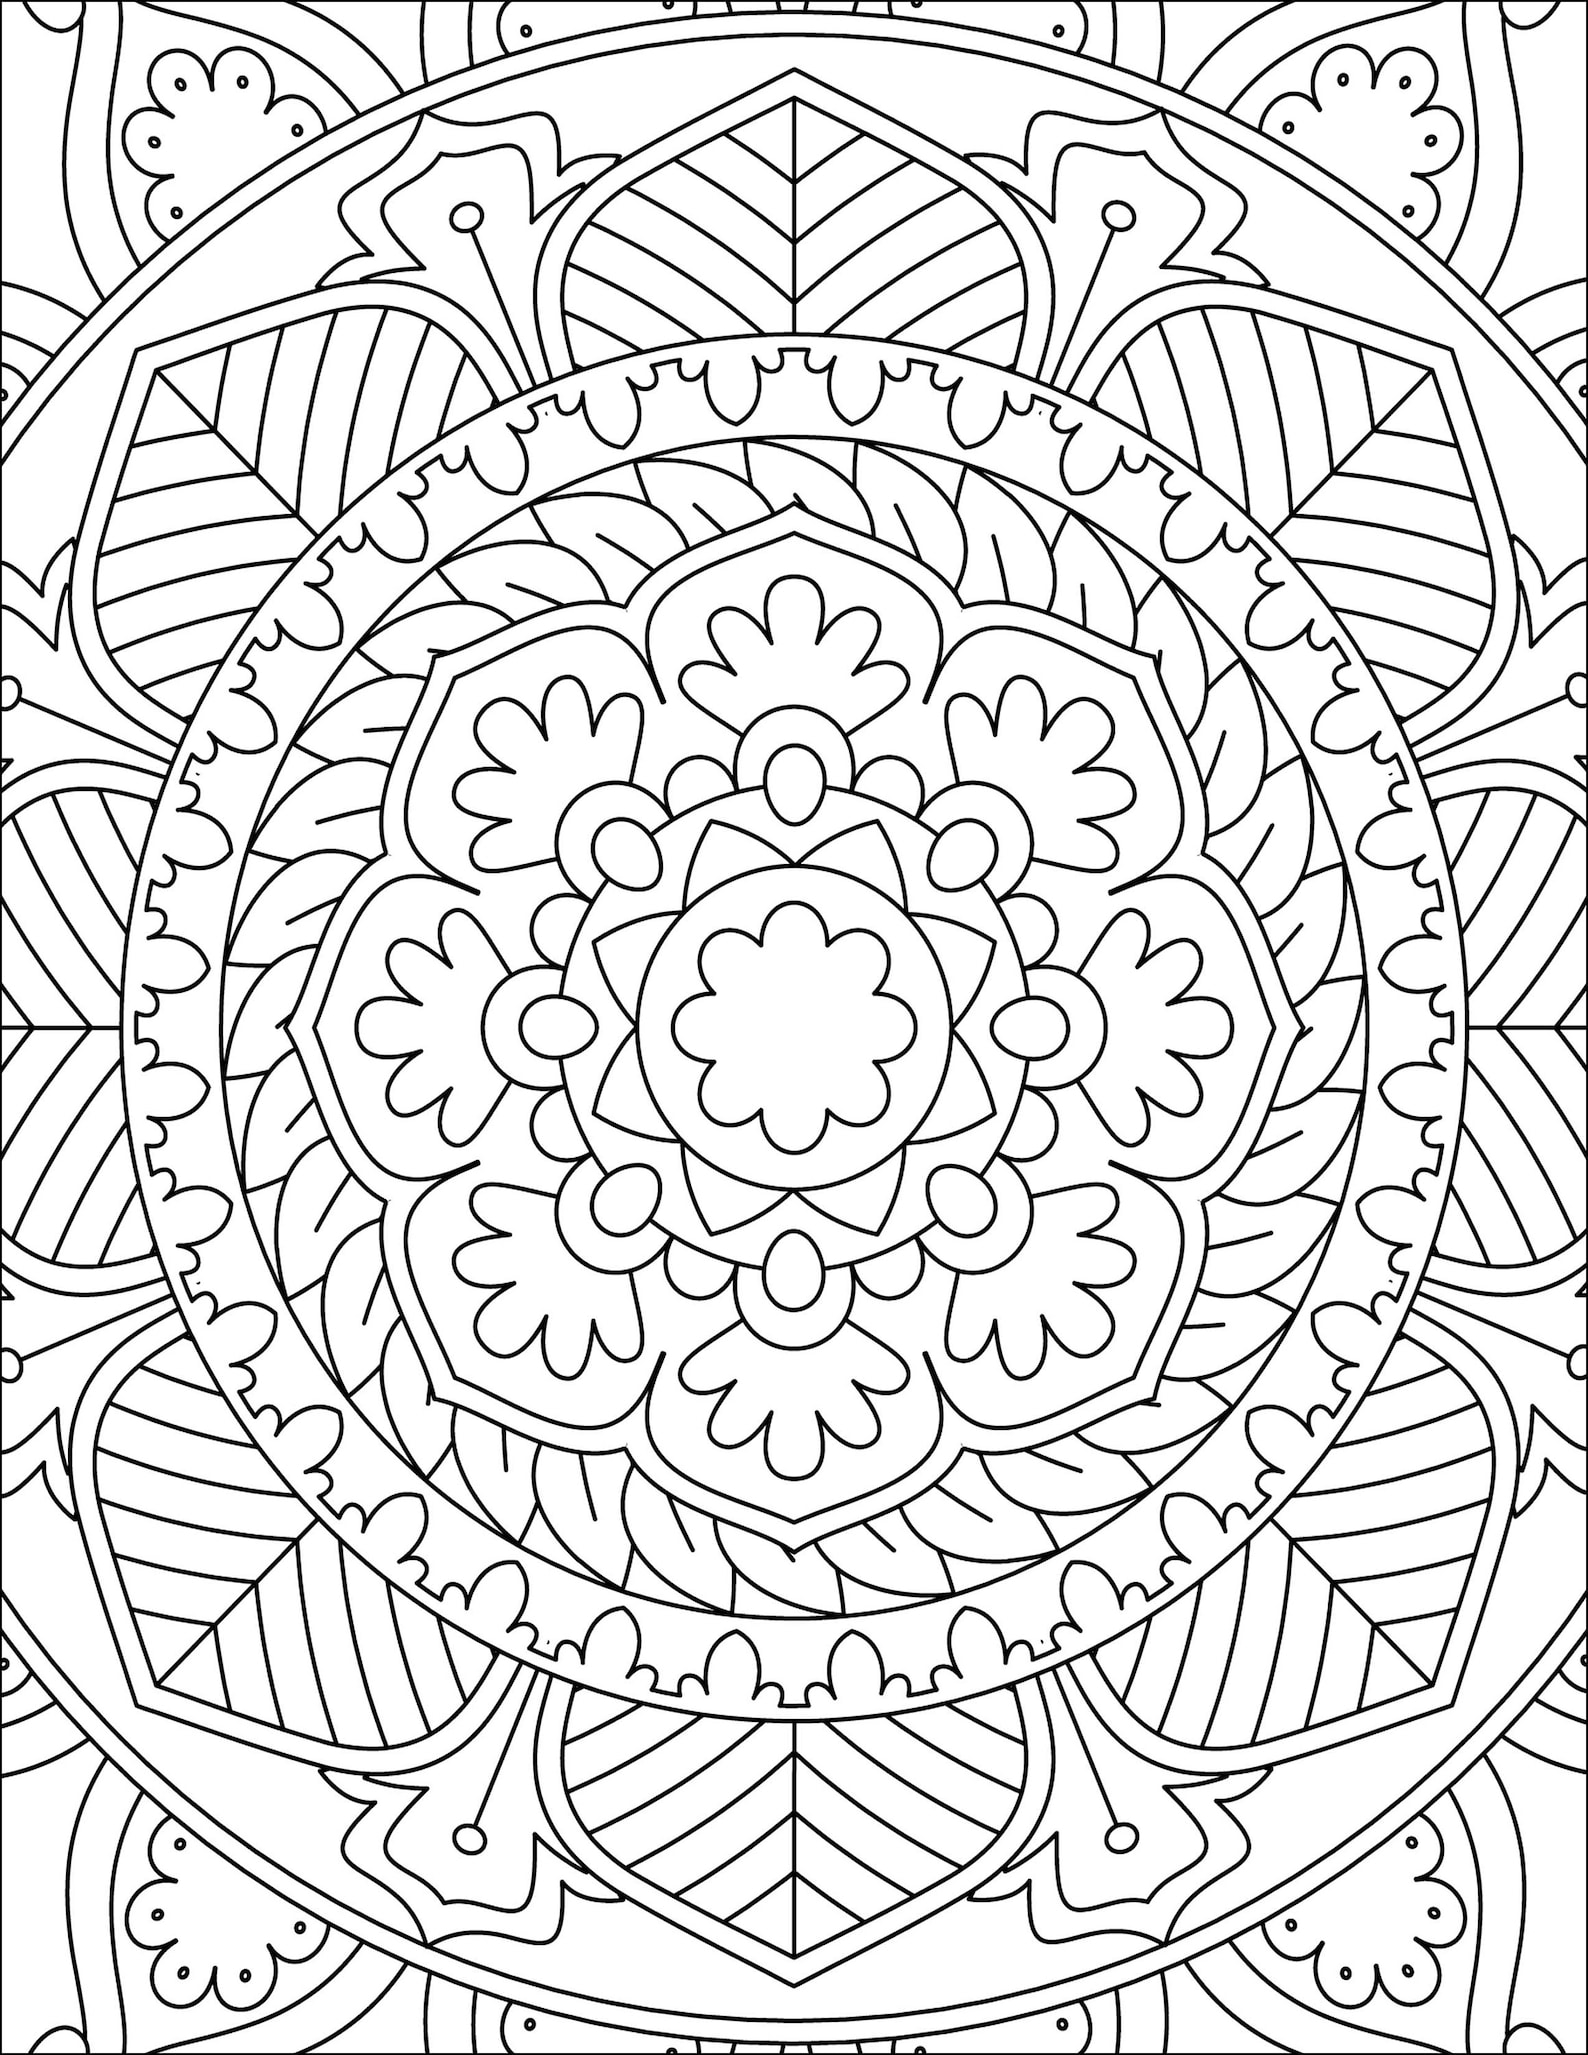 Beautiful and Fun Mandela Coloring Pages for all Ages | Etsy